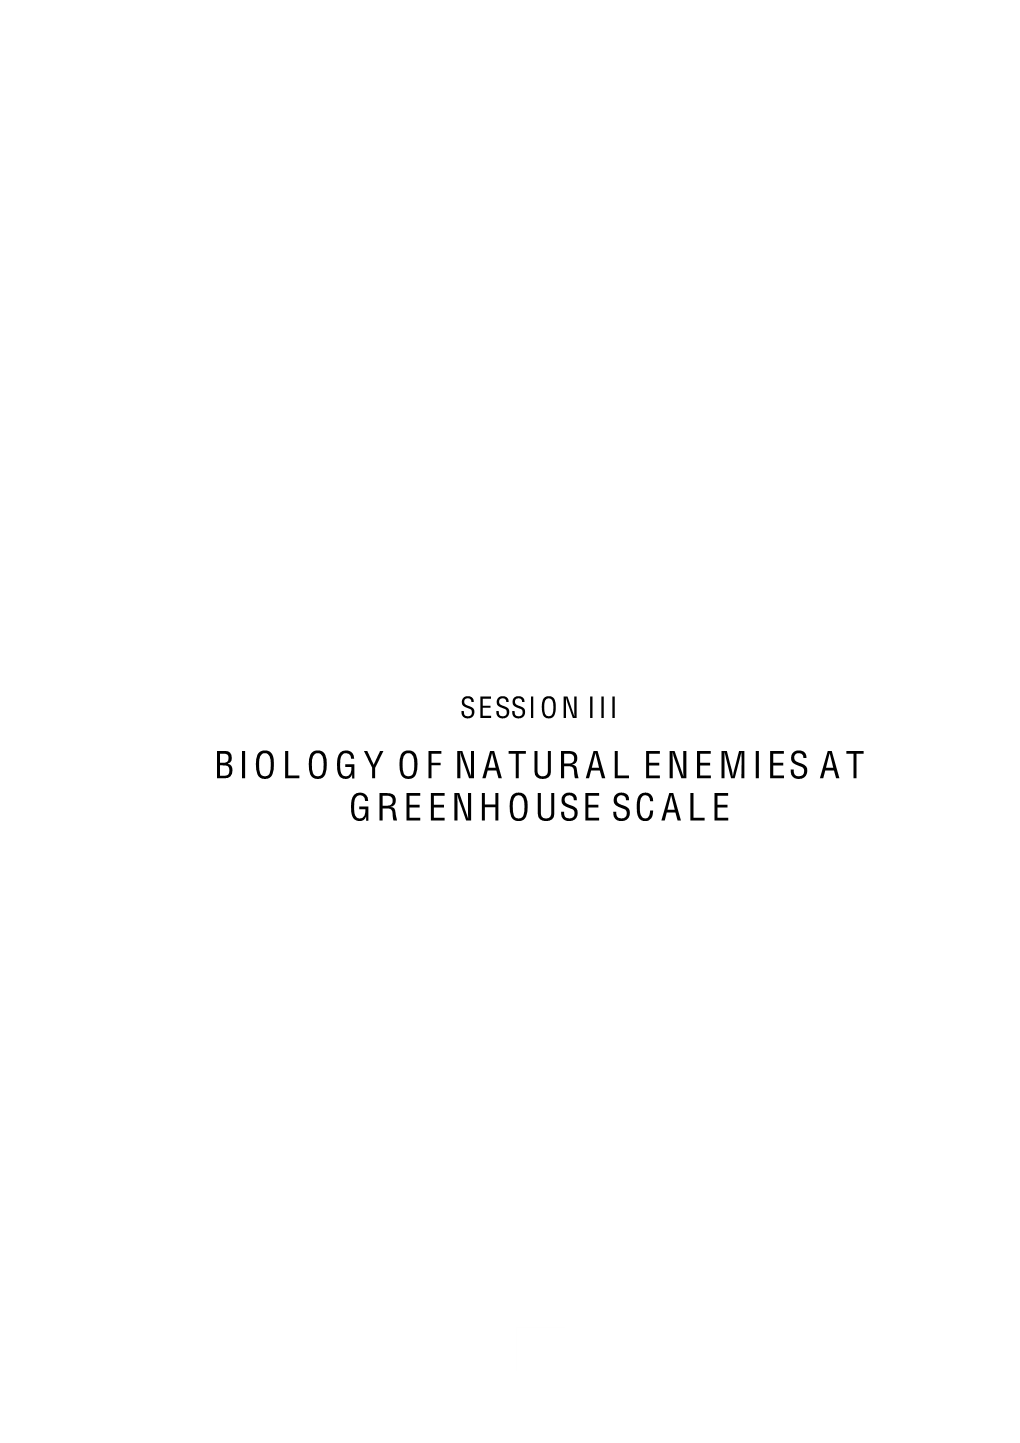 Biology of Natural Enemies at Greenhouse Scale